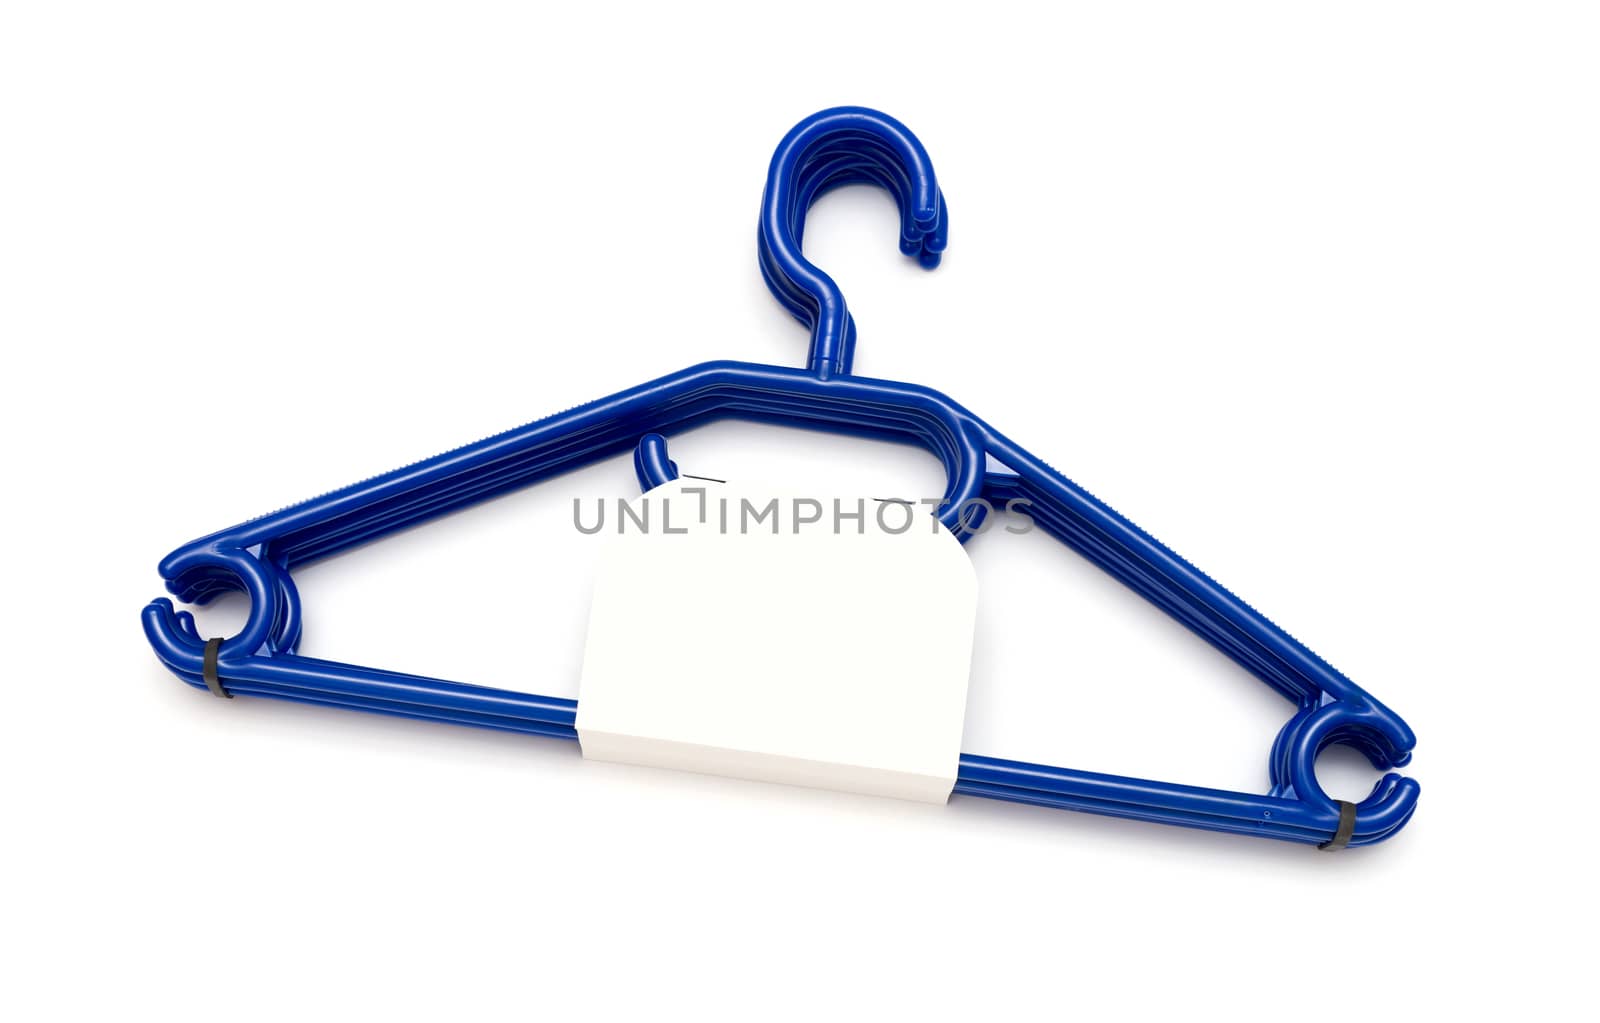 pack of new clothes hanger isolated on white background by DNKSTUDIO